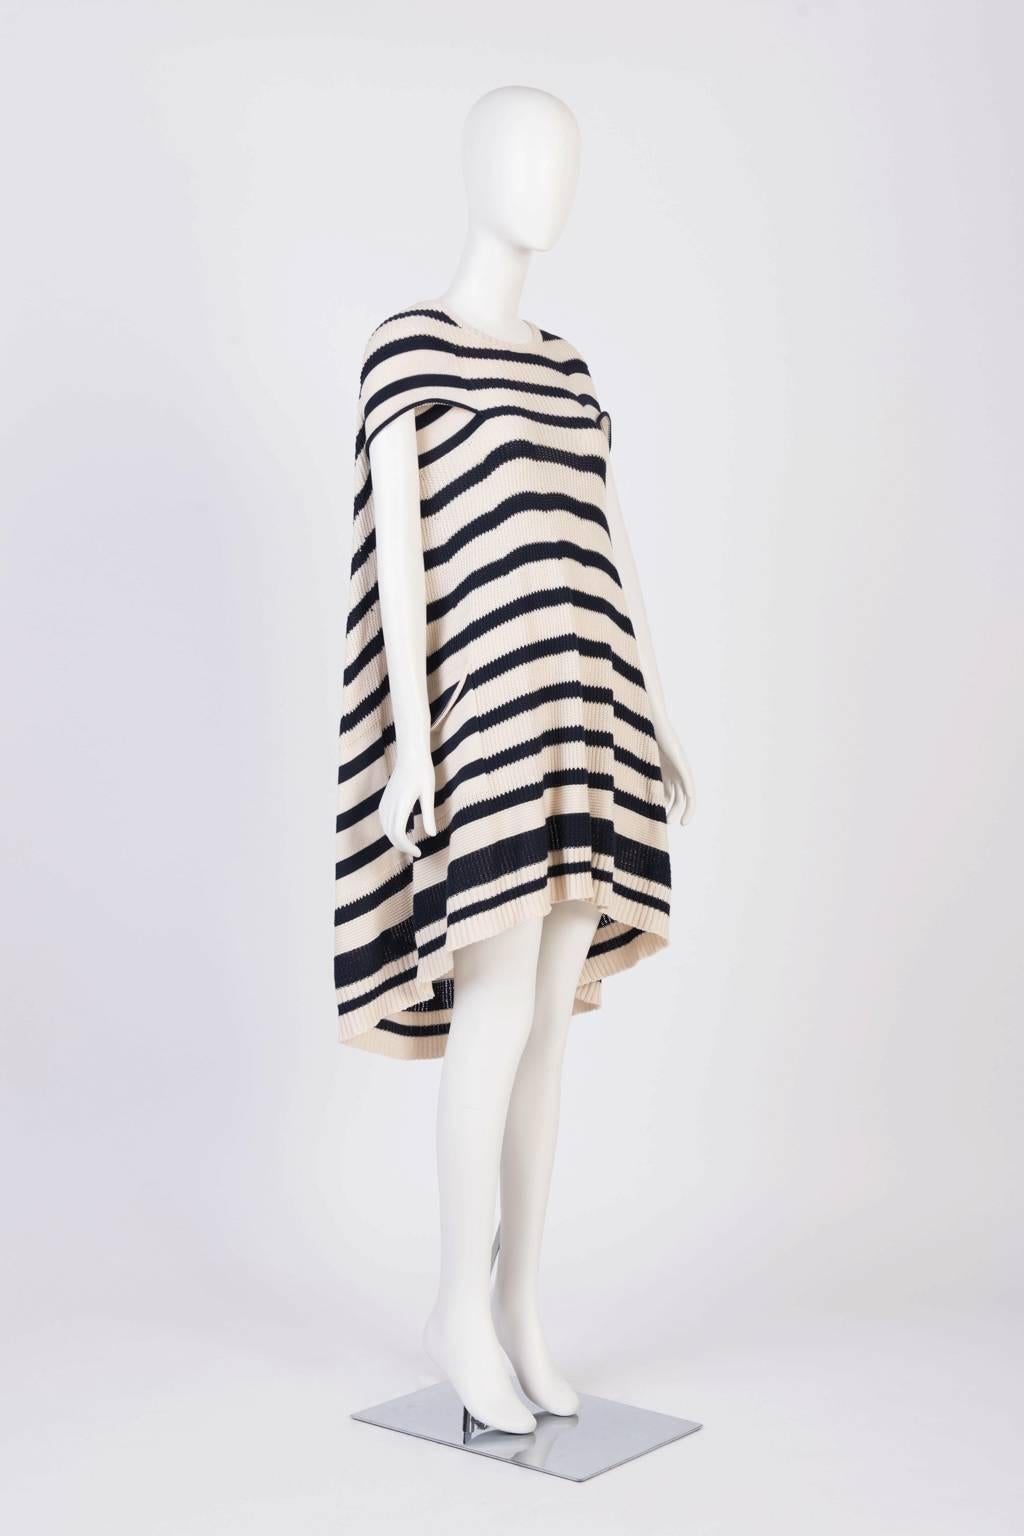 Blue and cream, knit poncho dress with knee length asymmetrical hem, capped sleevss, and patch pockets.